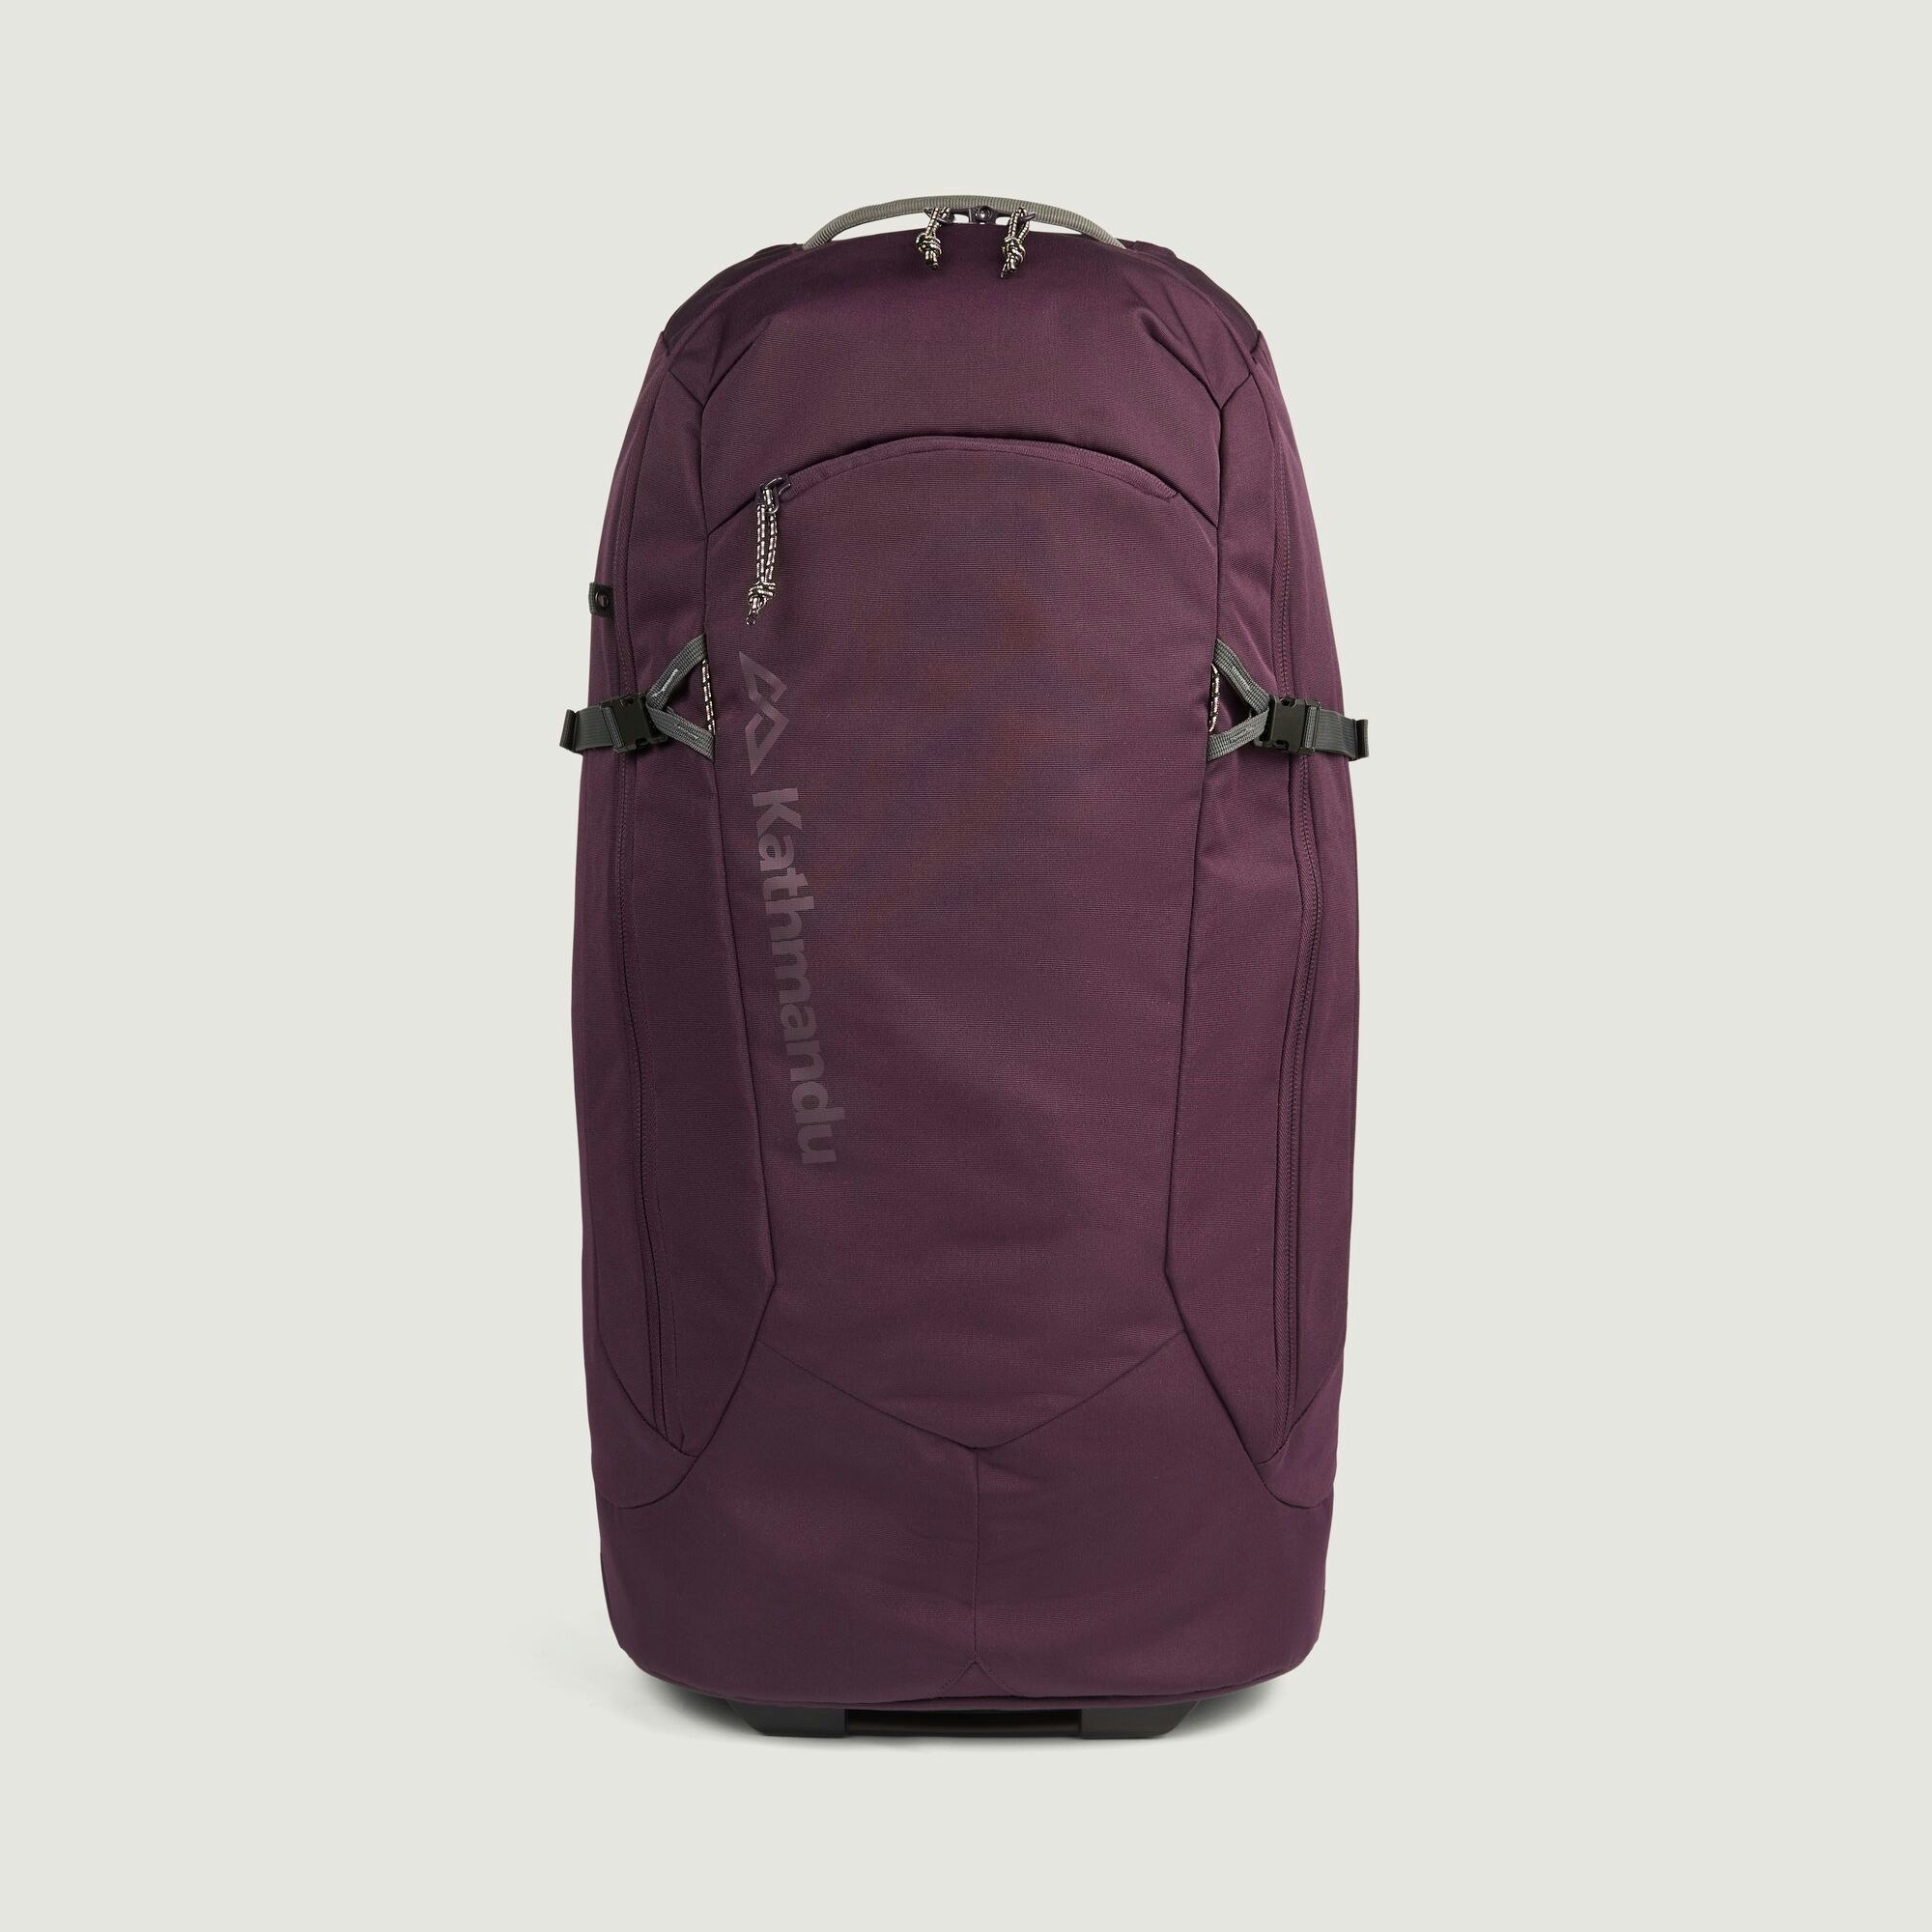 Shop Corporate & Casual Backpacks at Upto 74% OFF on Nasher Miles